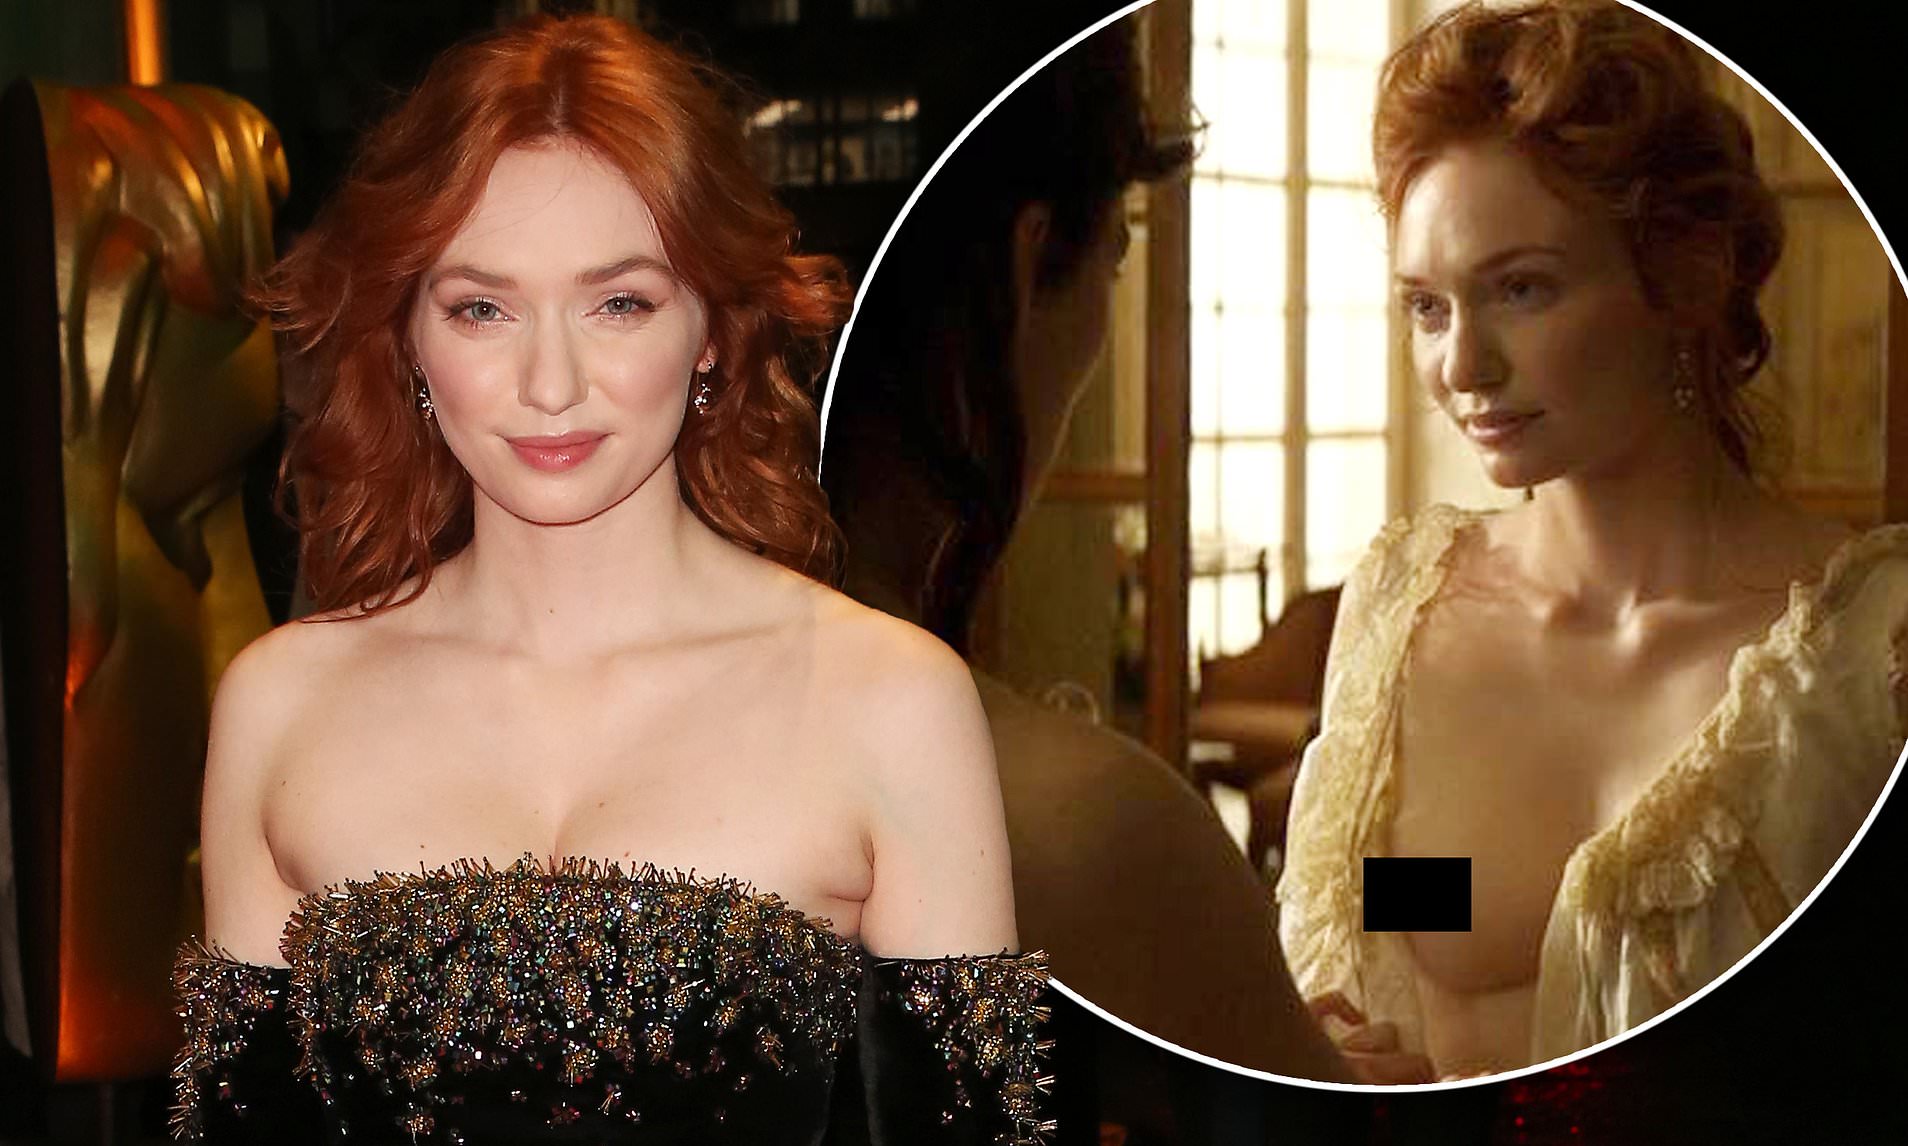 ammir abbas recommends Eleanor Tomlinson Nude